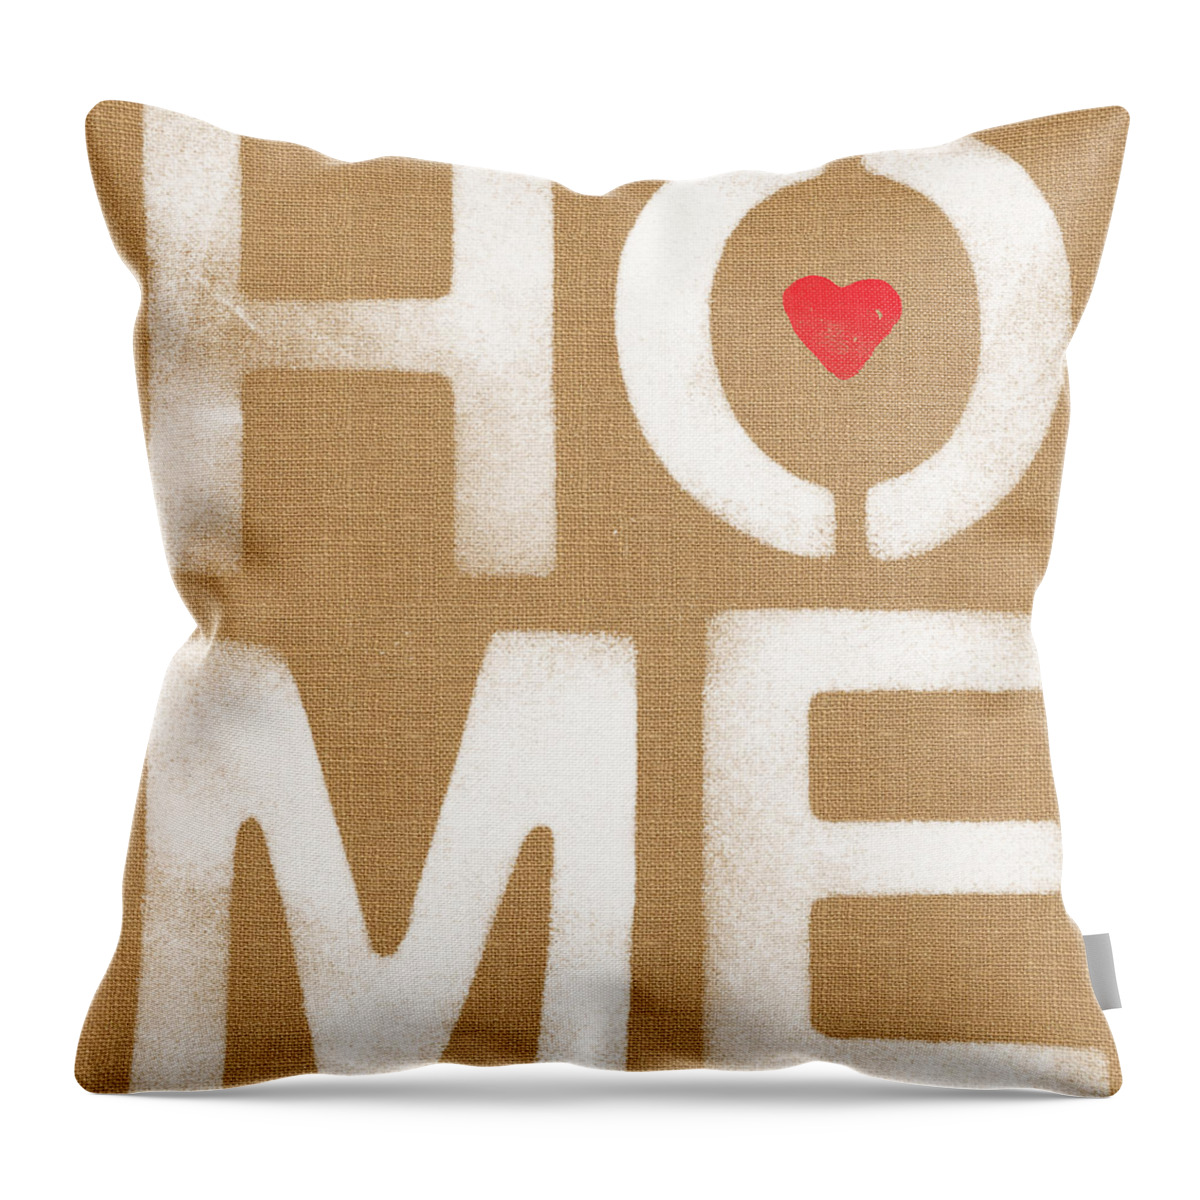 Heart Throw Pillow featuring the painting Heart In The Home- Art by Linda Woods by Linda Woods